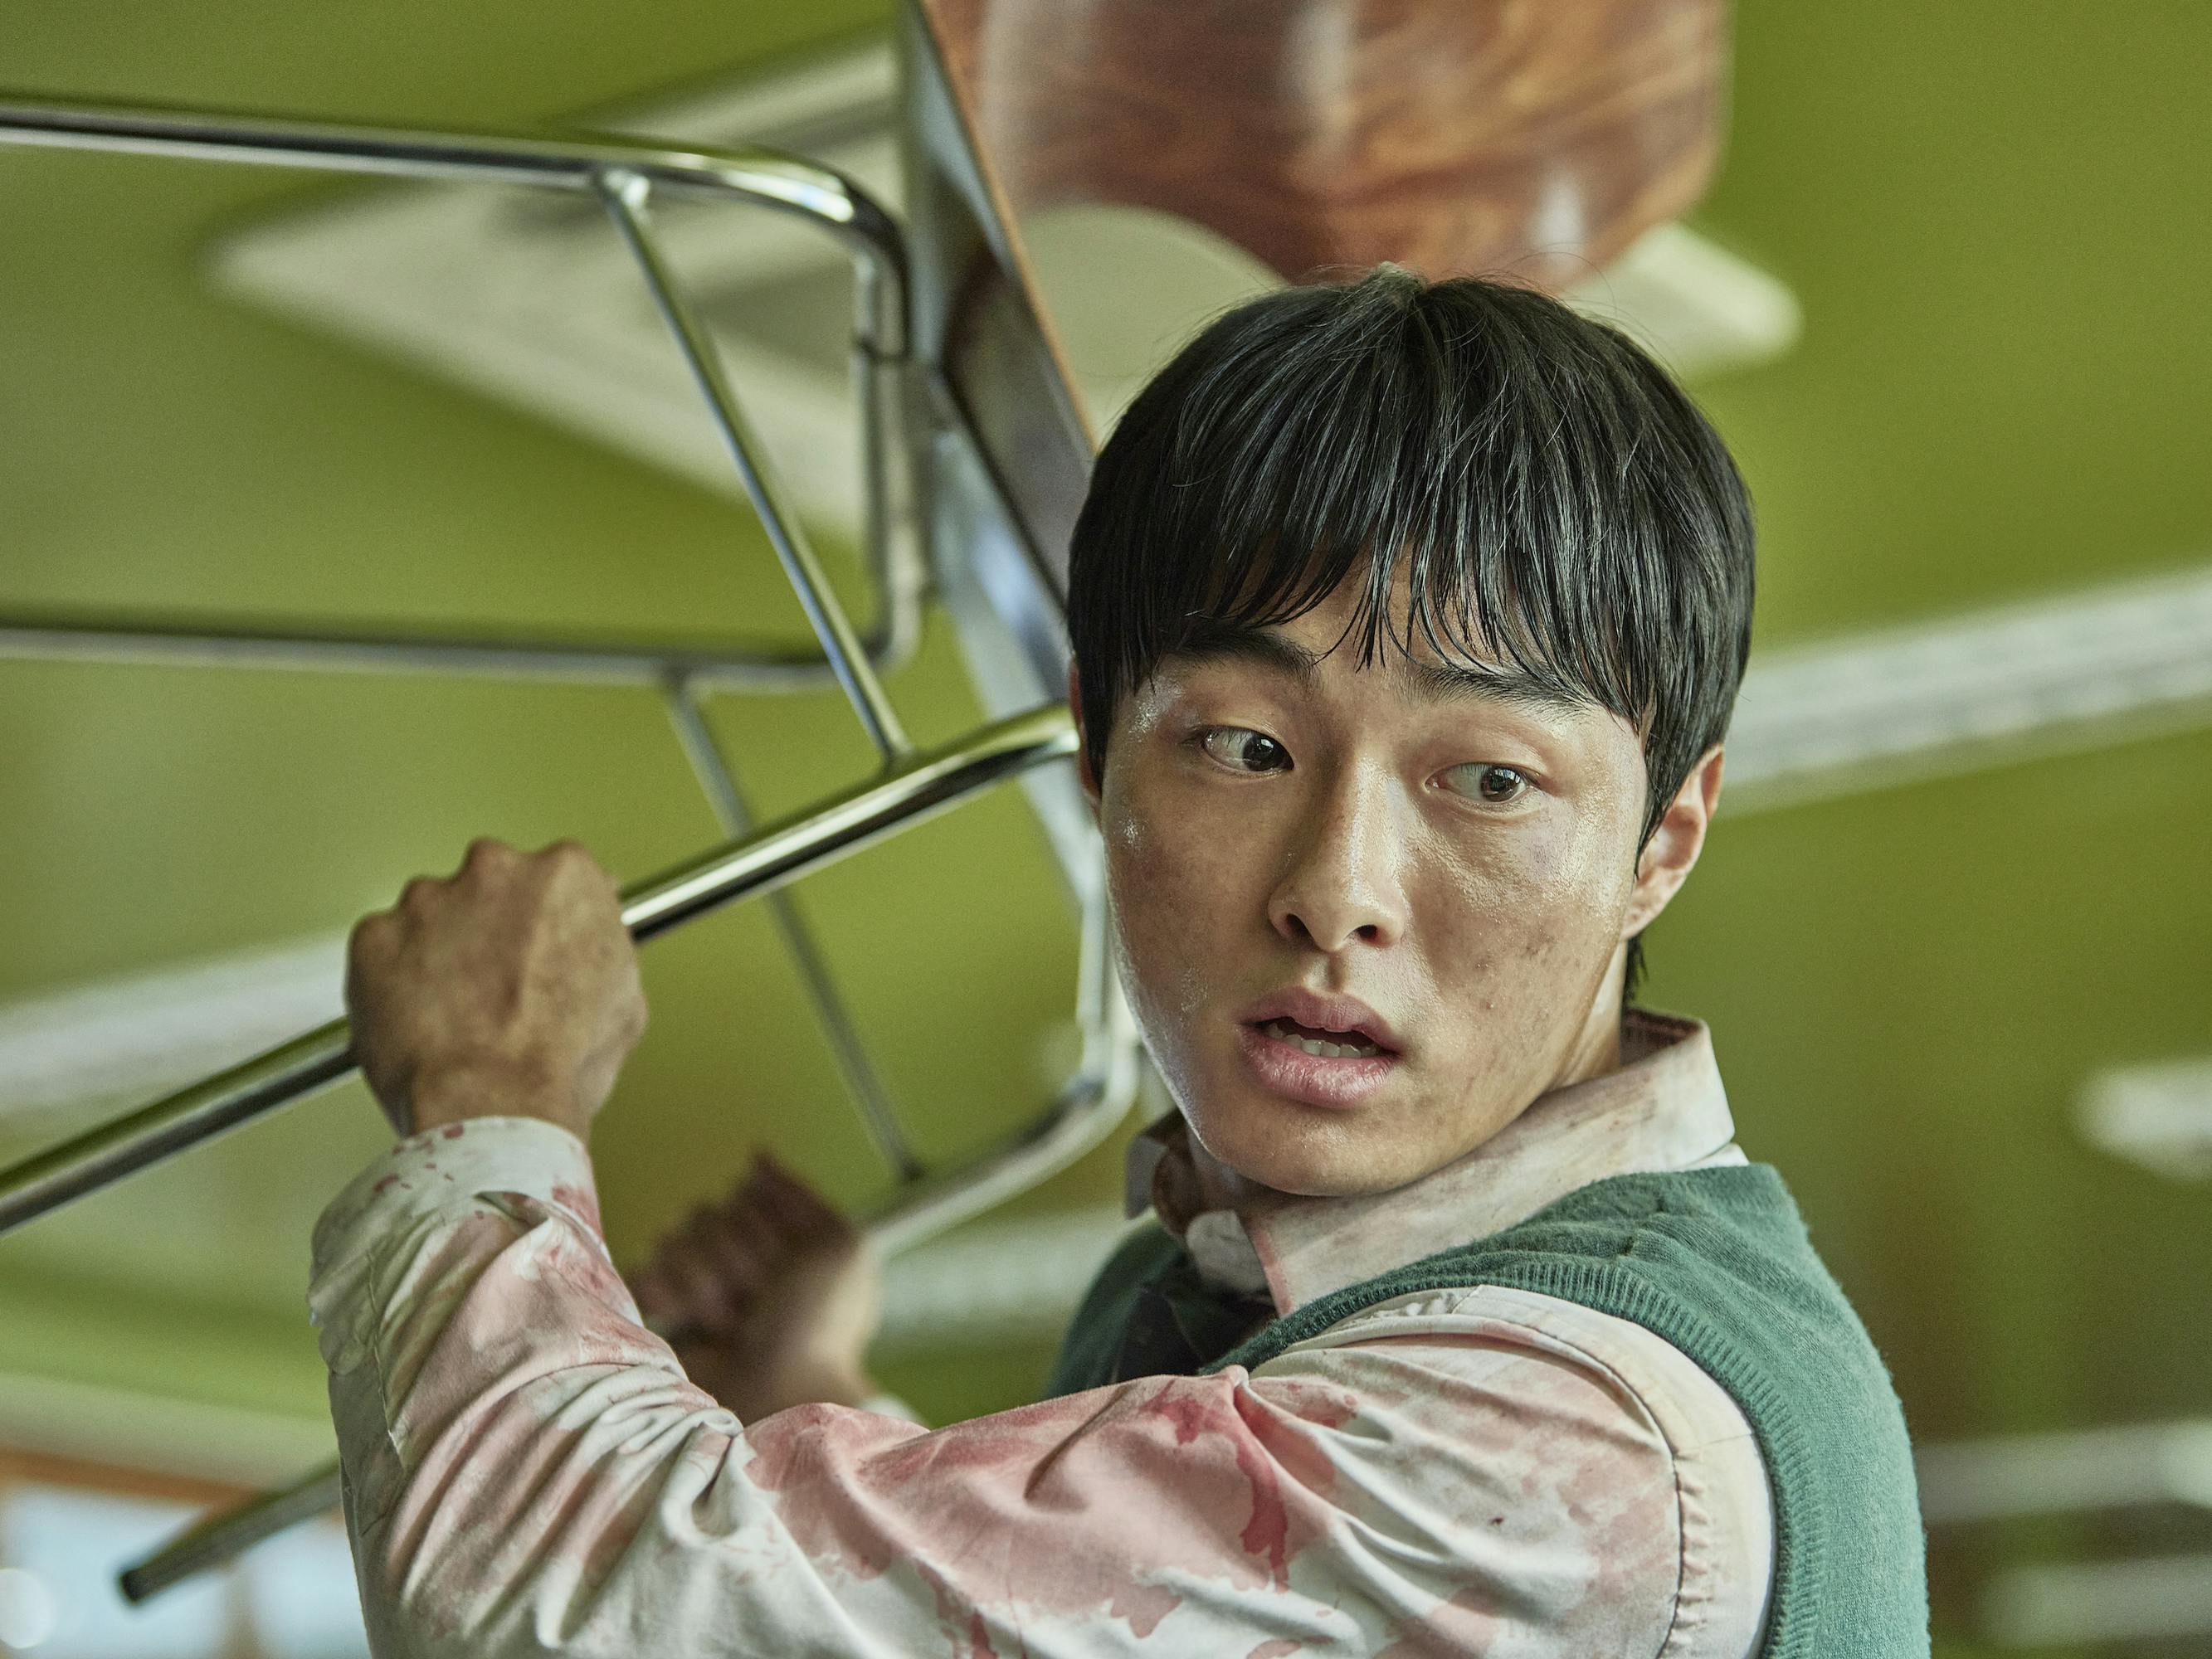 Yoon Chan-young in All of Us Are Dead brandishes a chair in a green-painted room.